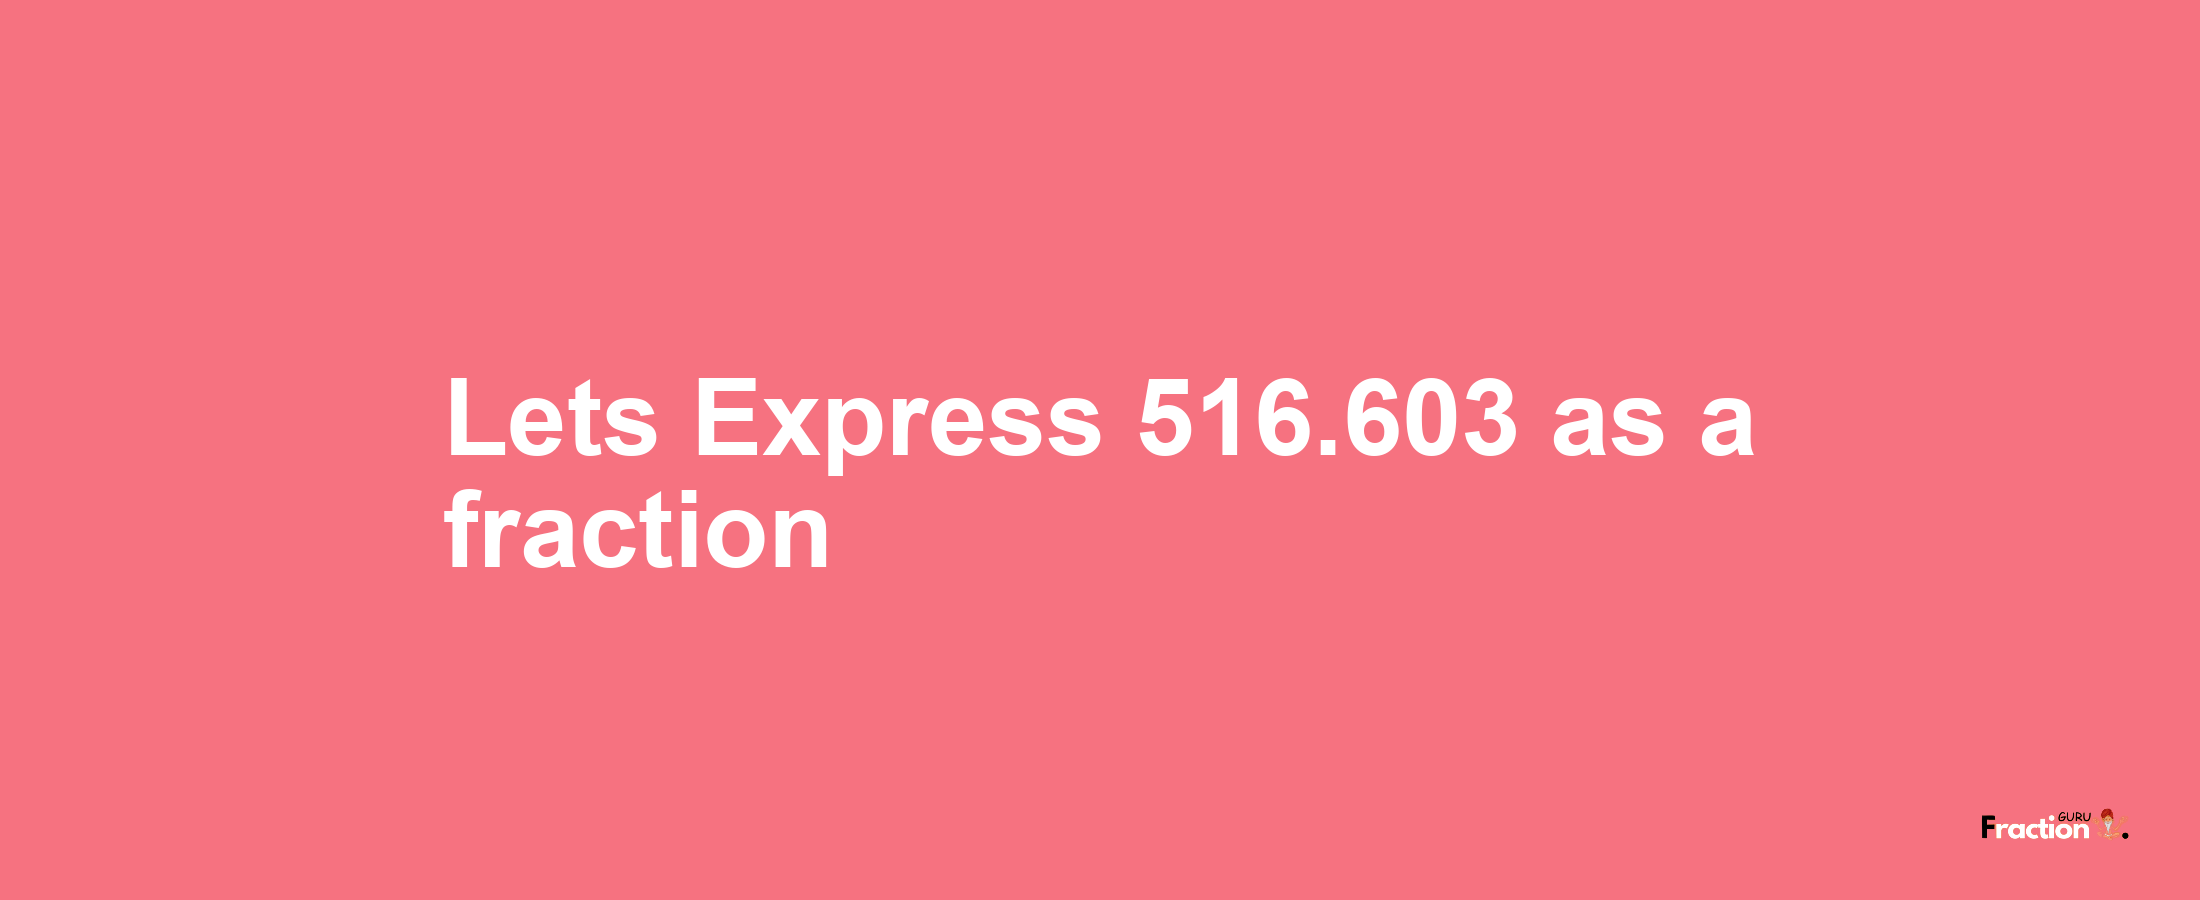 Lets Express 516.603 as afraction